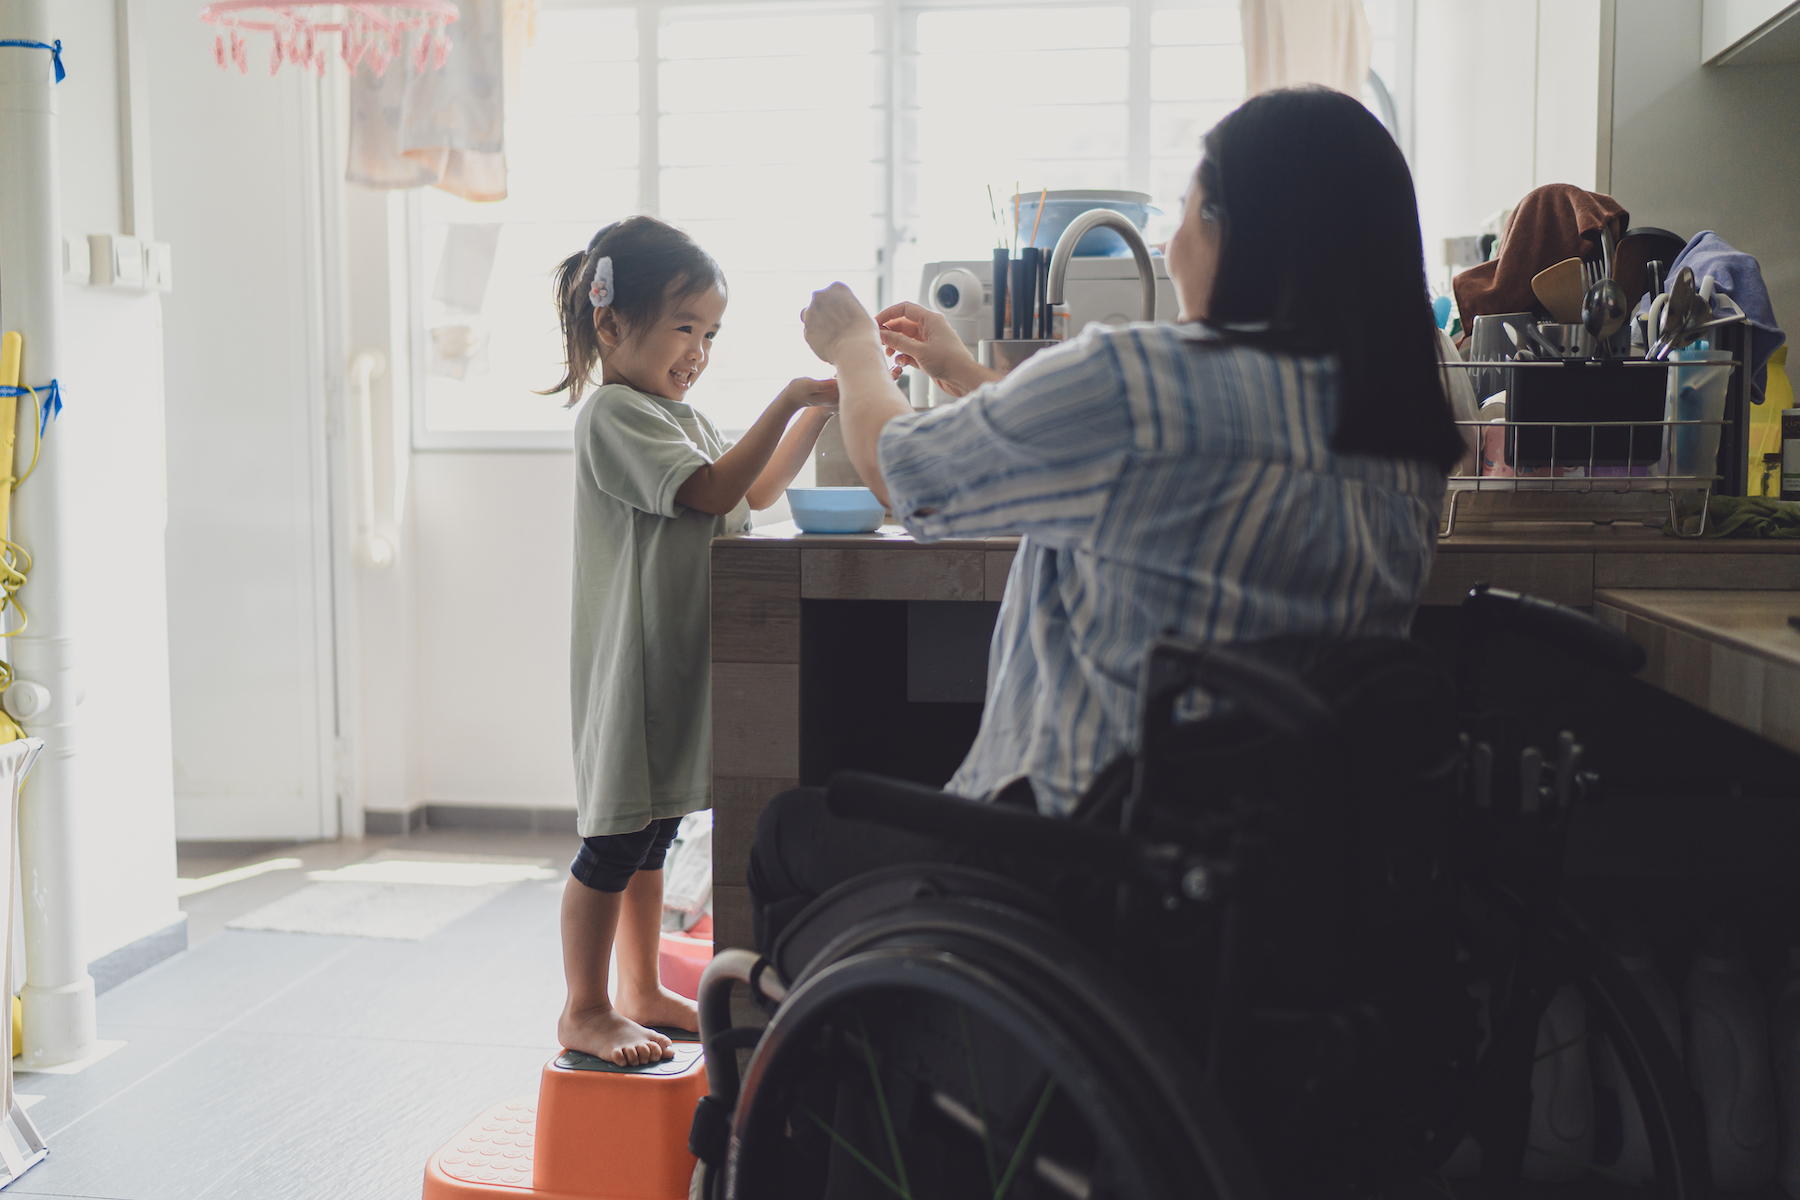 A mother in a wheelchair plays with her young daughter at the kitchen sink
